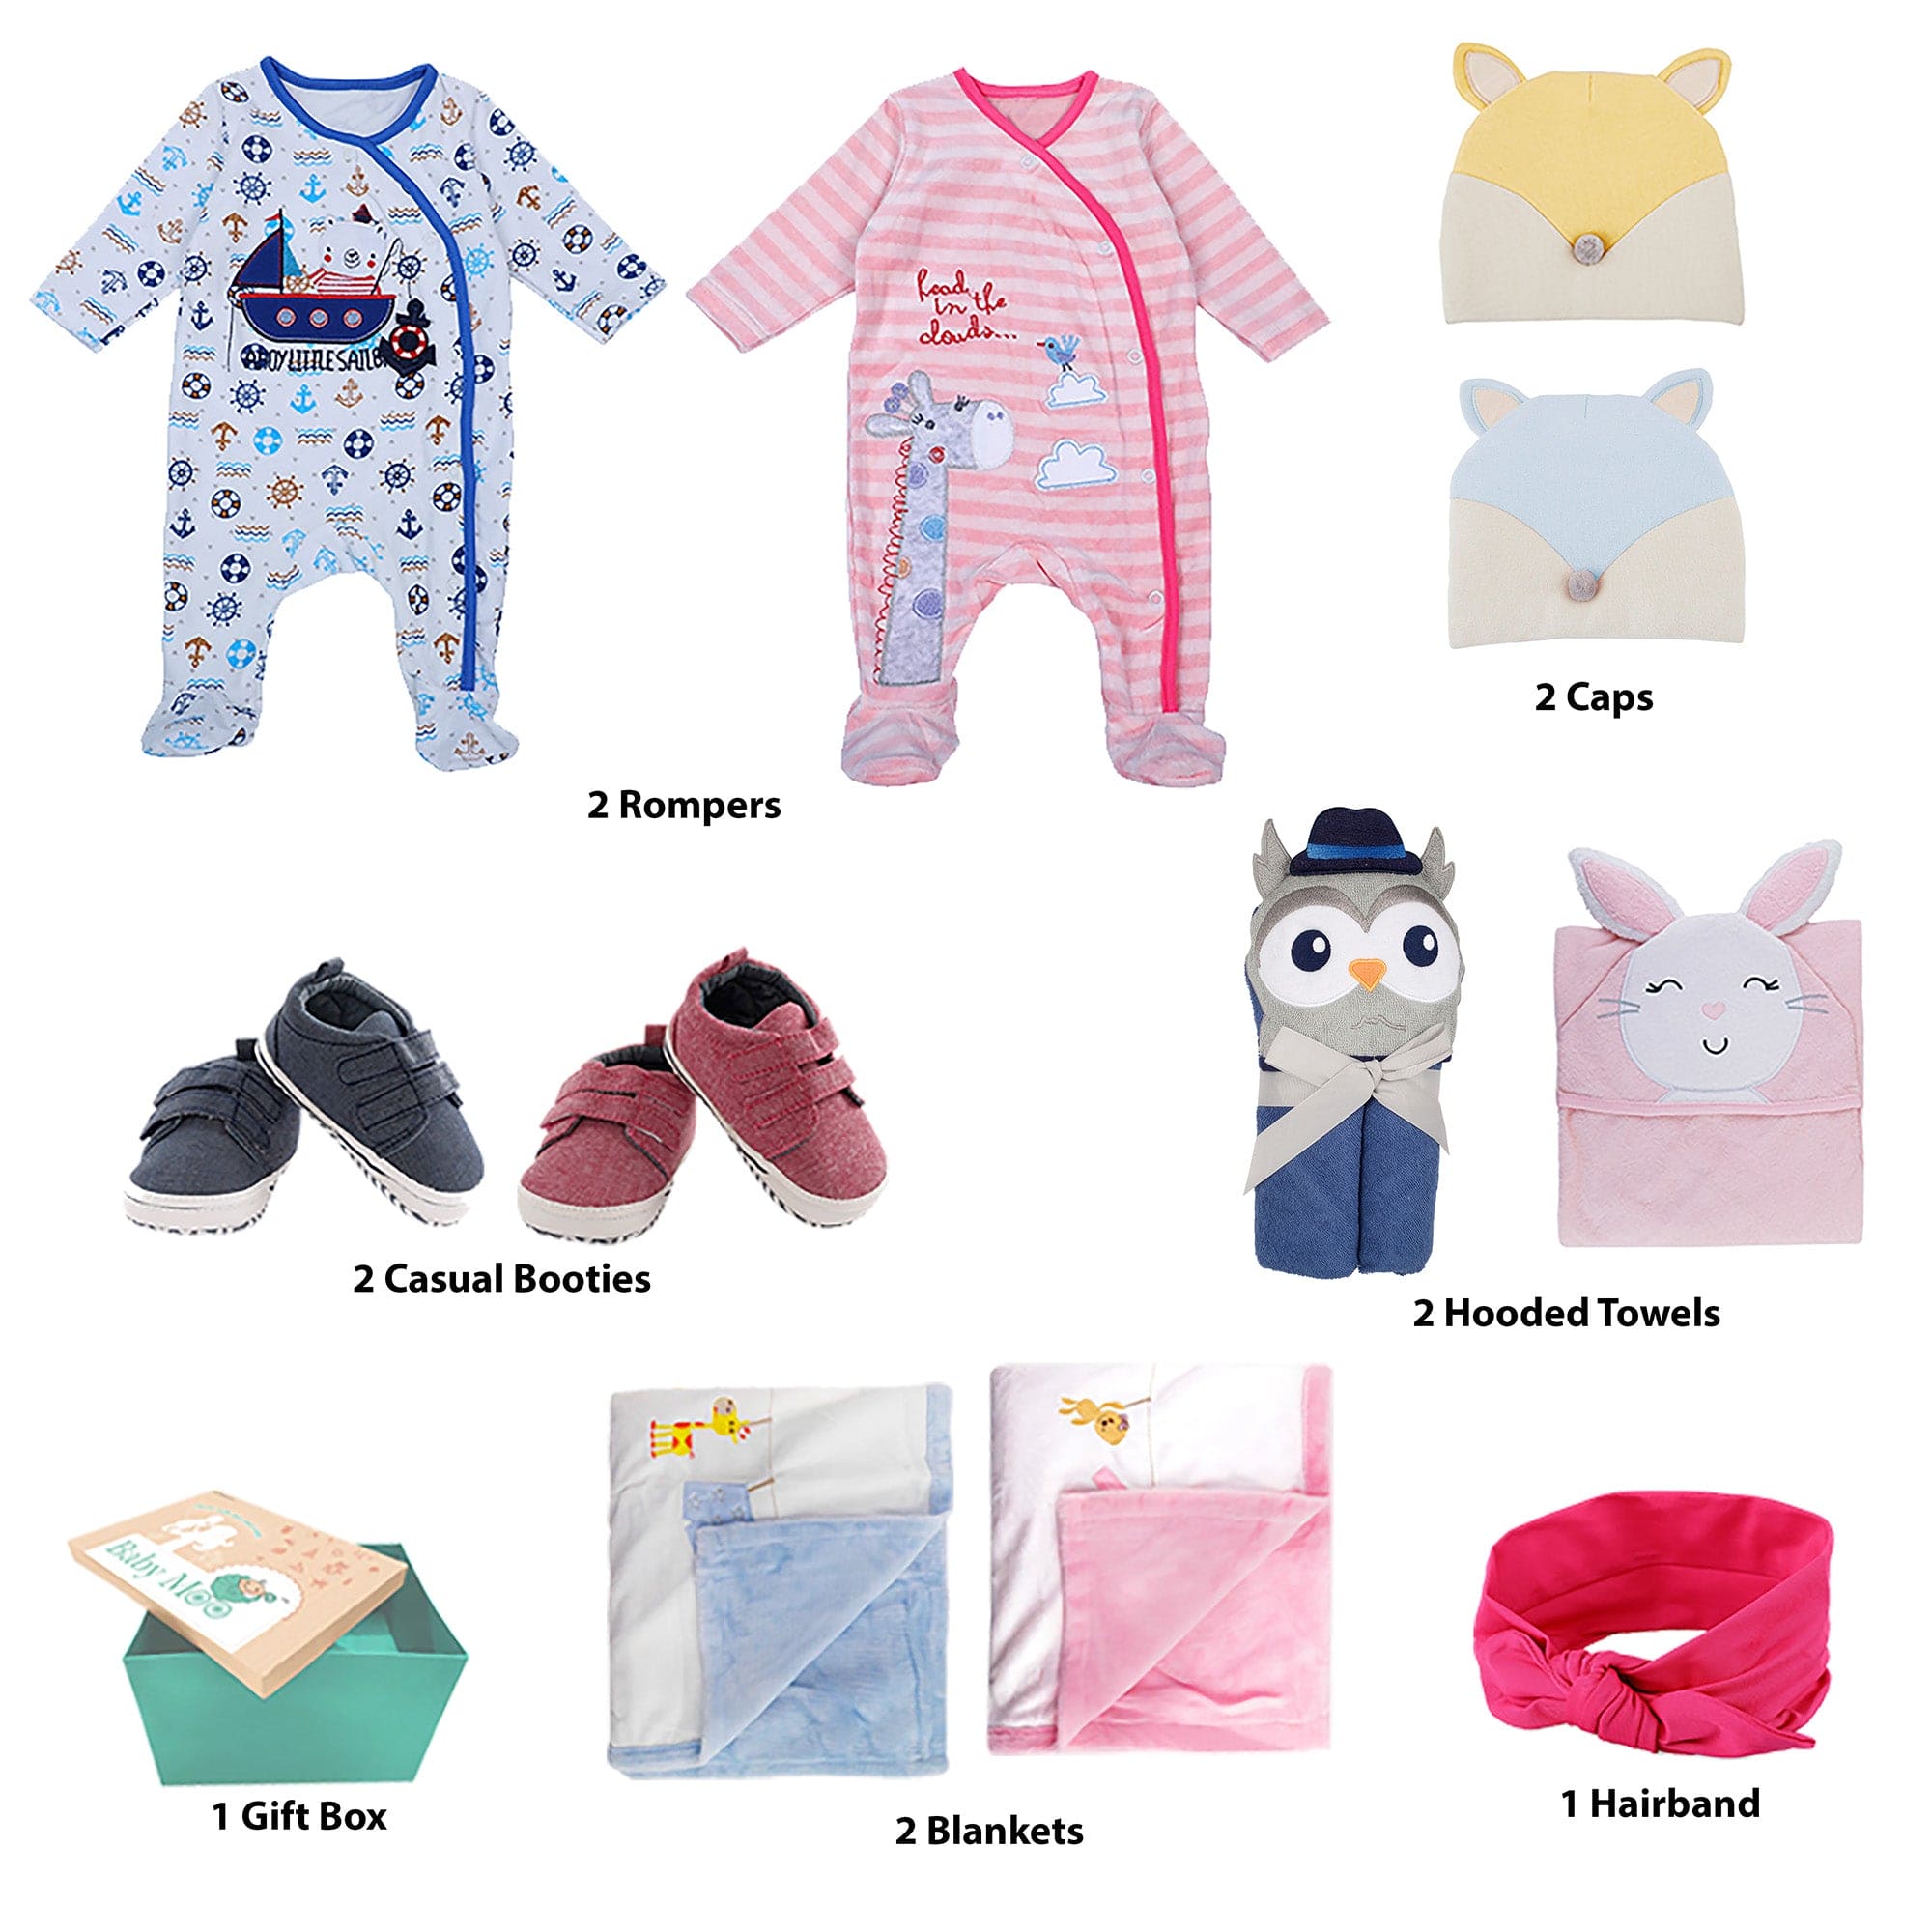 New Born Hospital Bag Essentials Combo-0-6 Months- 39 Items – Moms Home